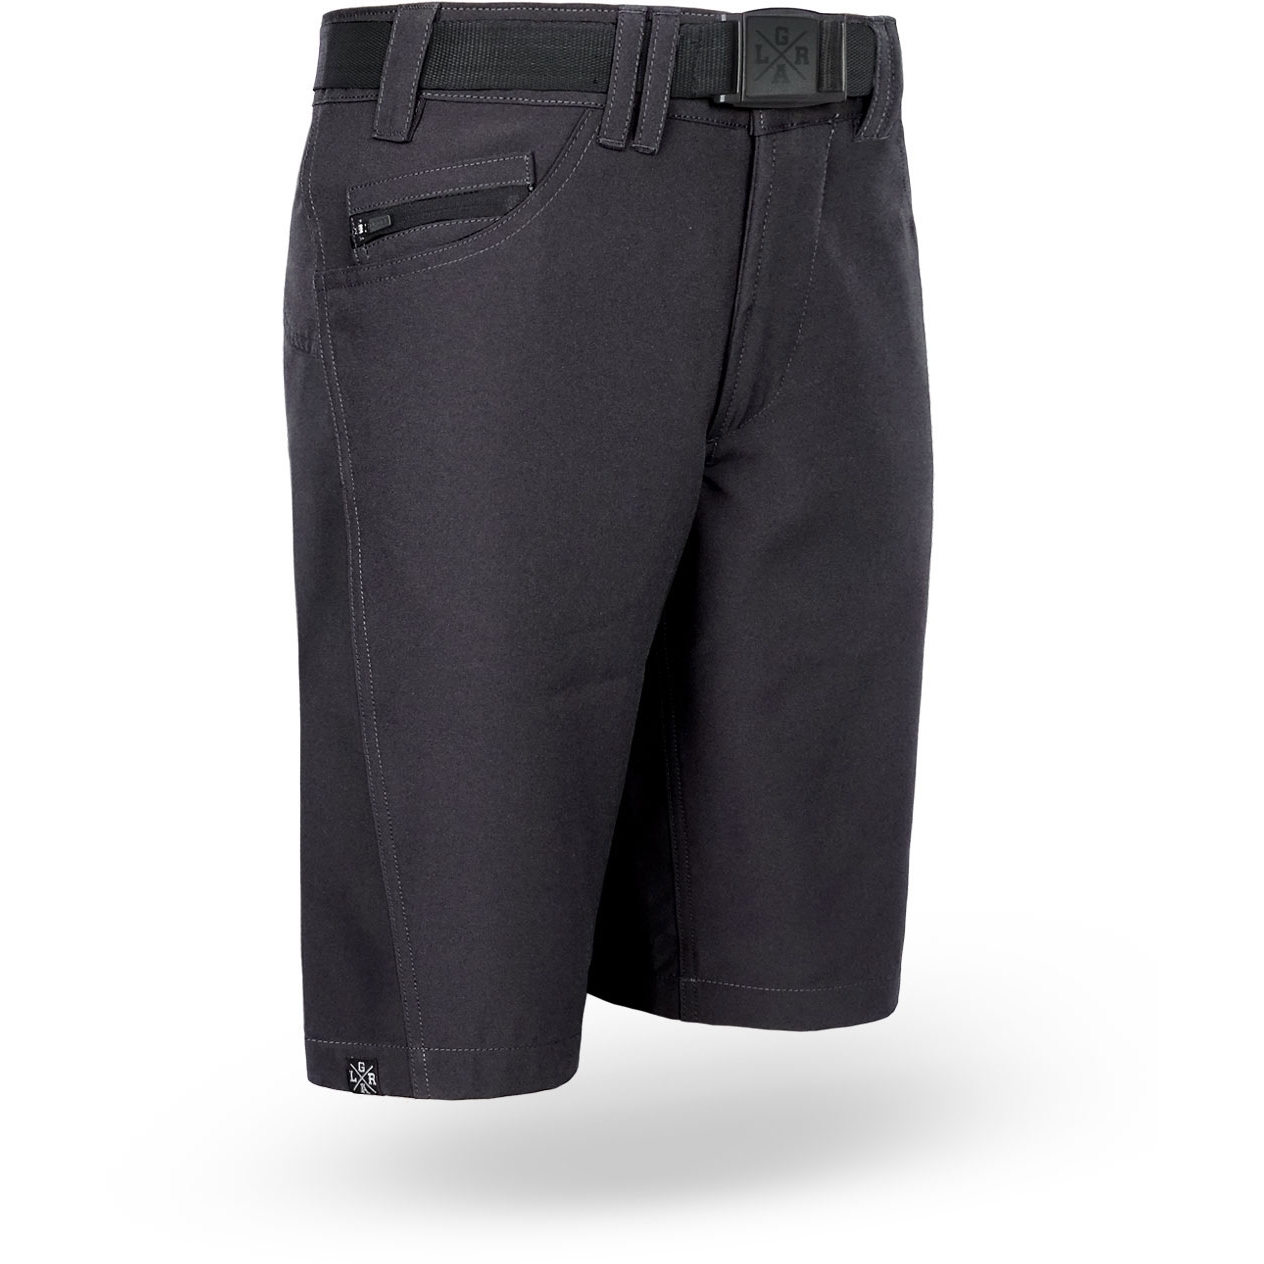 Image of Loose Riders Sessions Technical Shorts - Black